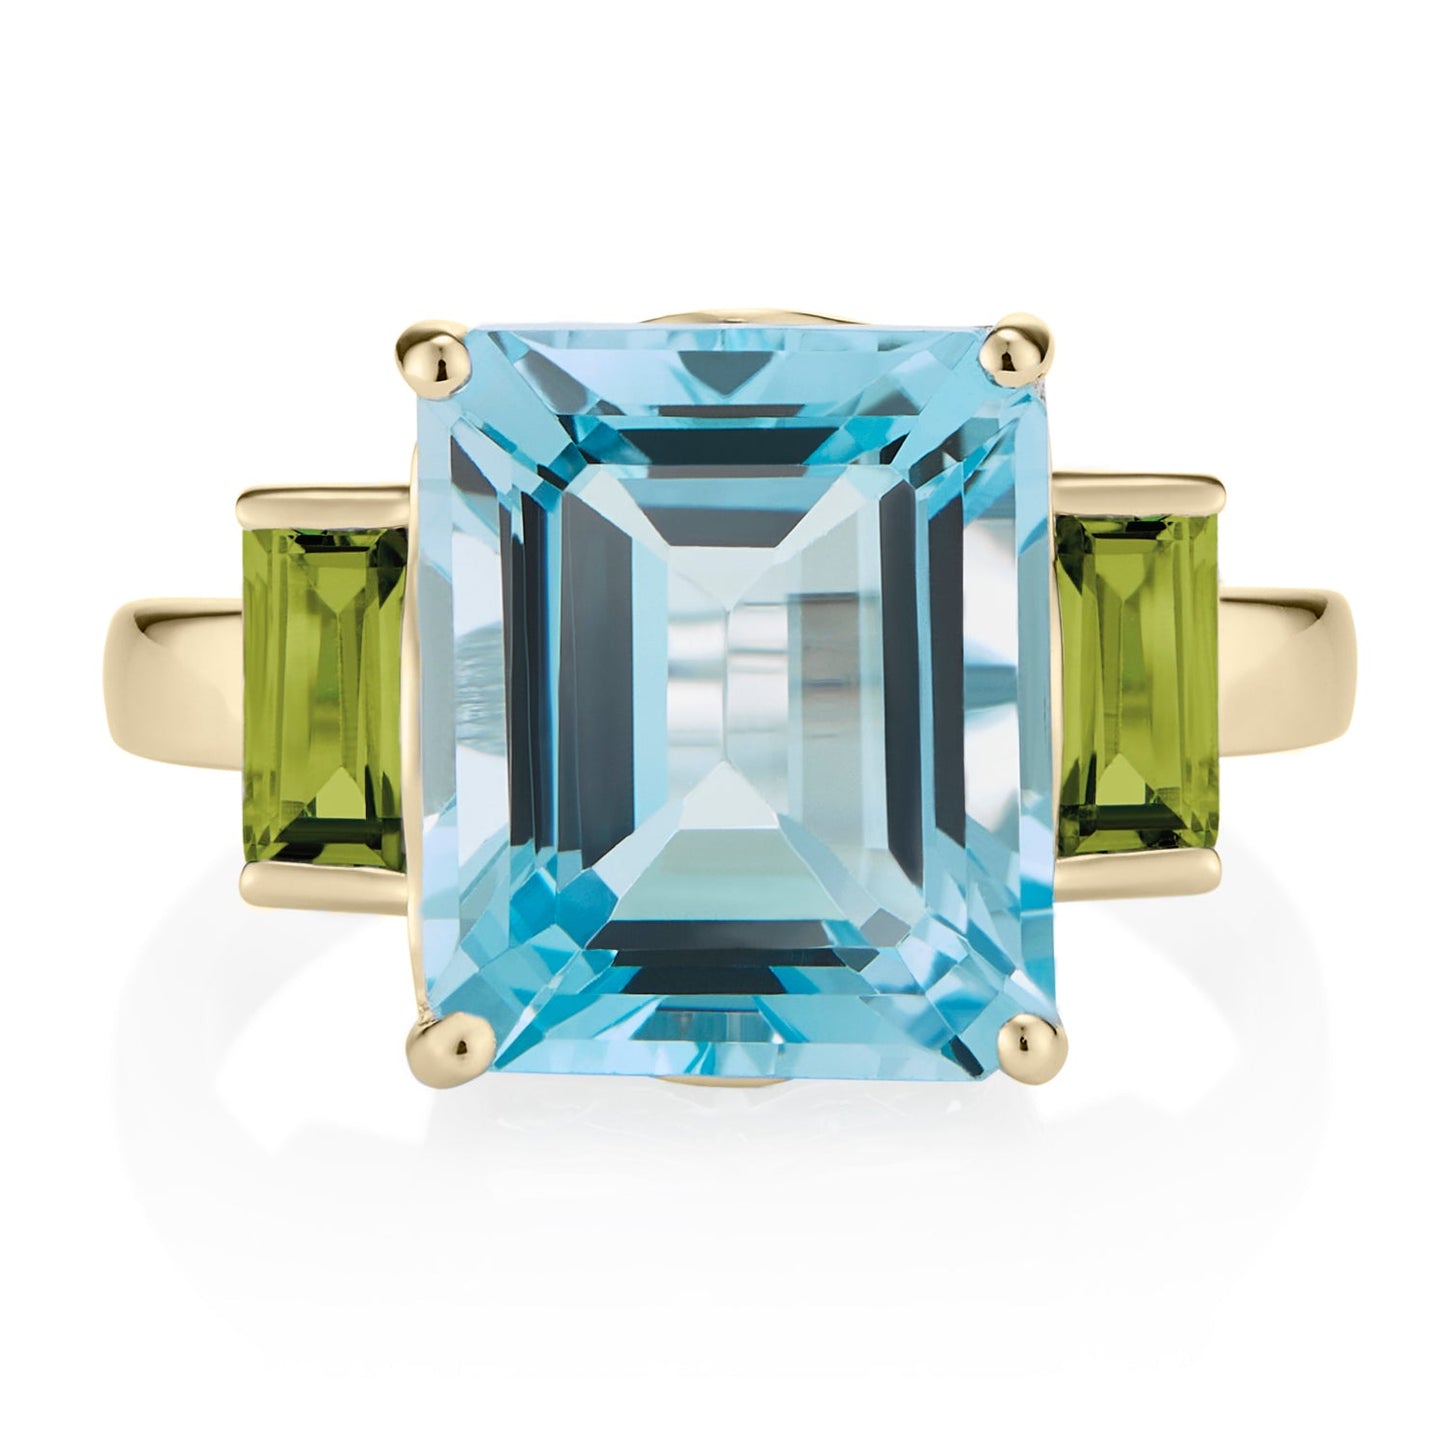 London-made luxury custom gold gemstone jewellery -9ct Yellow Gold Octagon Ring in Peridot and Blue Topaz – Andalusian Collection, Augustine Jewellery, British Jewellers, Gemstone Jewellery, Luxury Jewellery London.